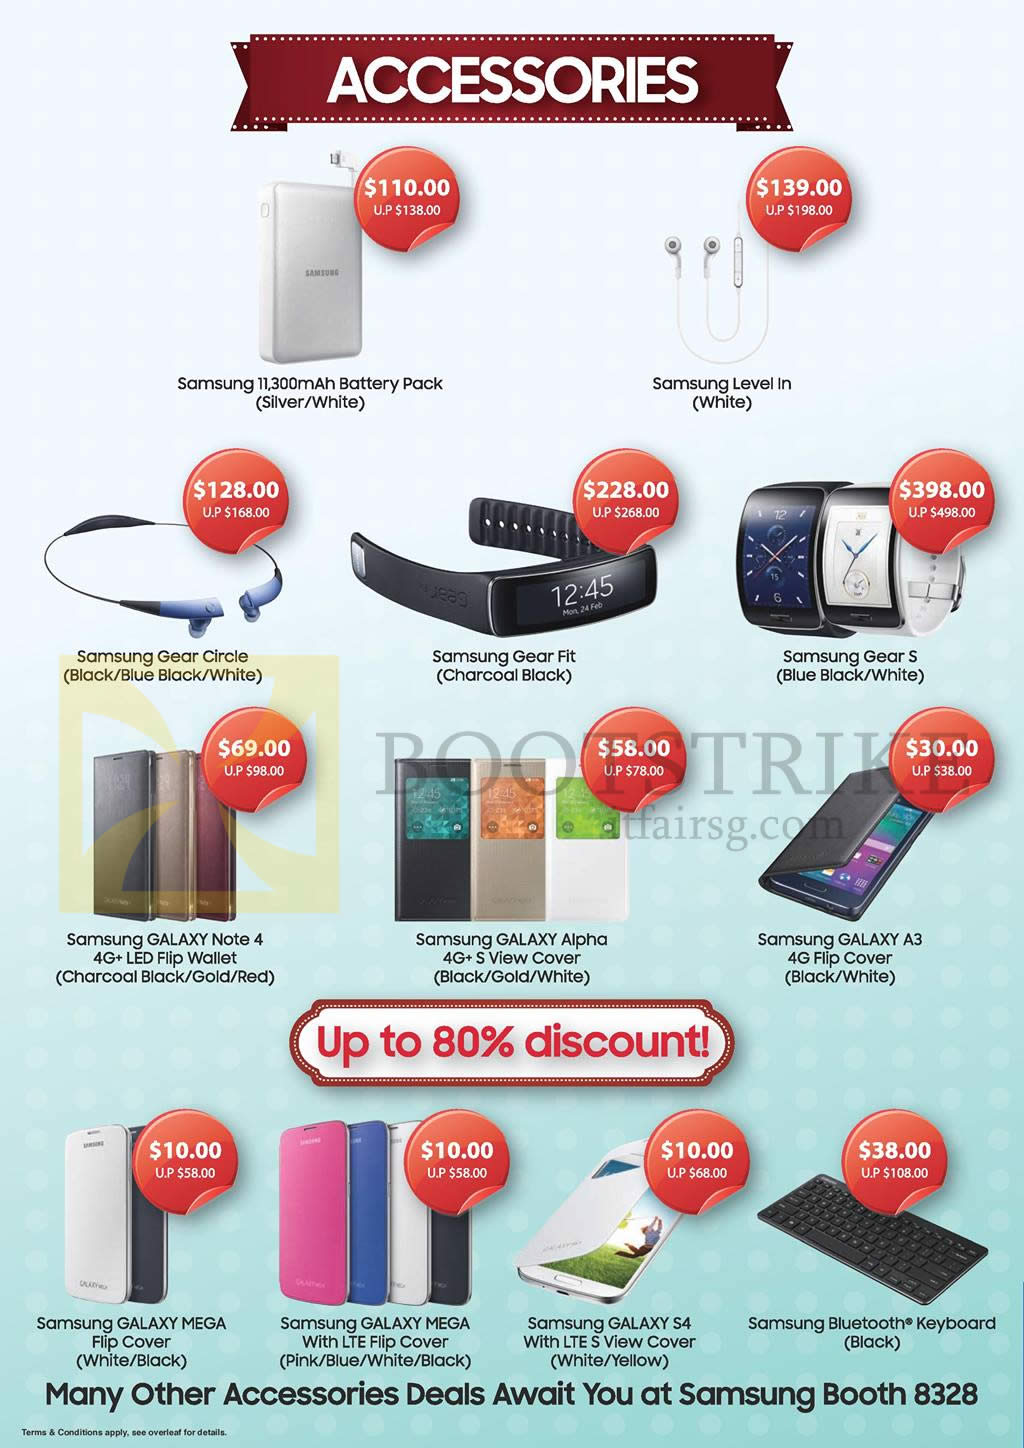 IT SHOW 2015 price list image brochure of Samsung Accessories Battery Pack, Earphone, Gear Fit, S, Mobile Phone Cases, Keyboard